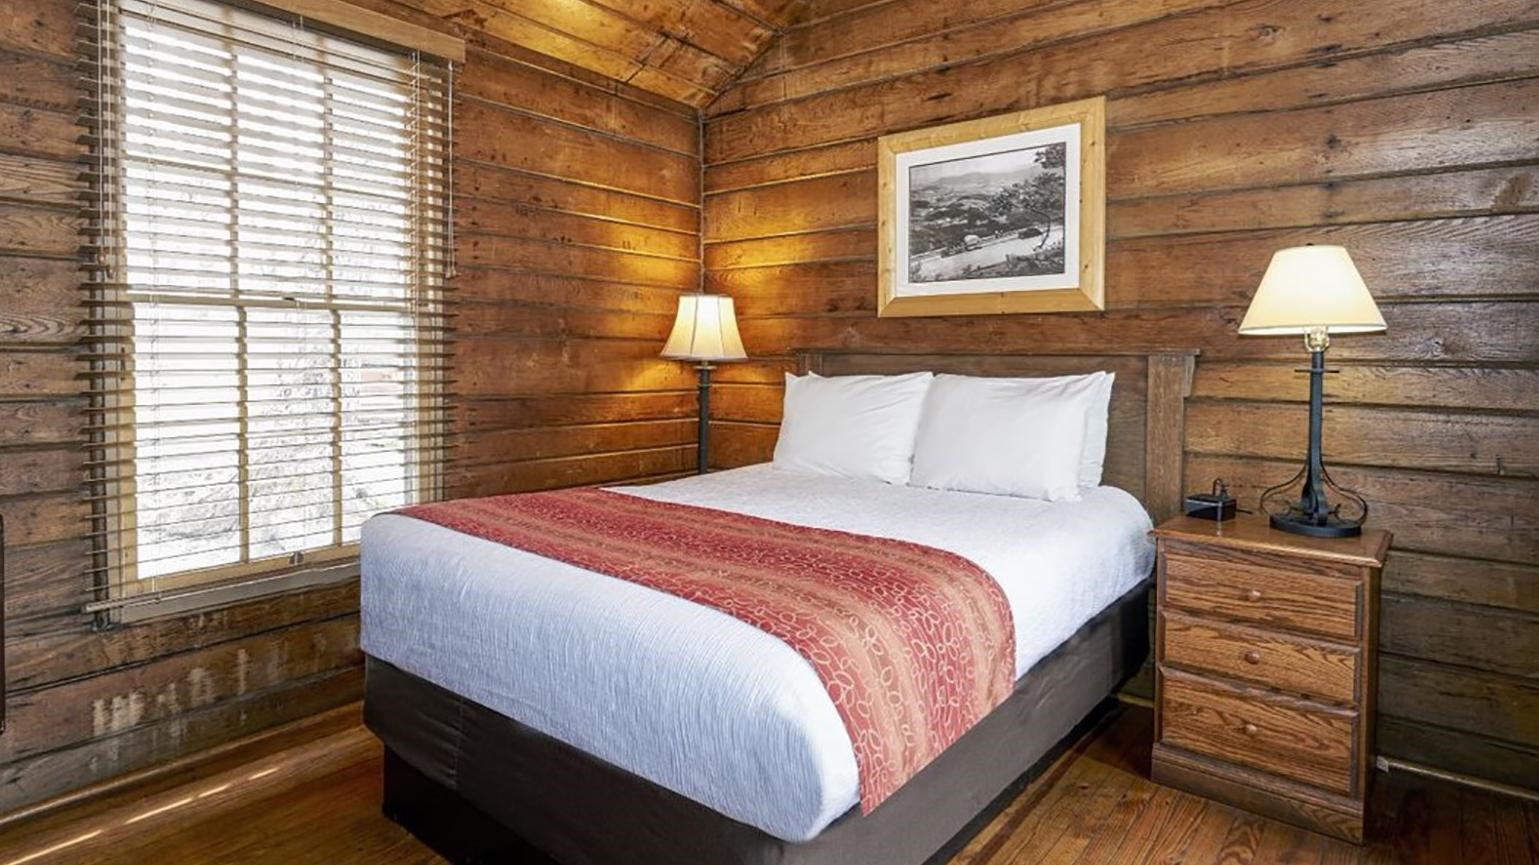 The interior of a rustic cabin with wood walls and a bed.